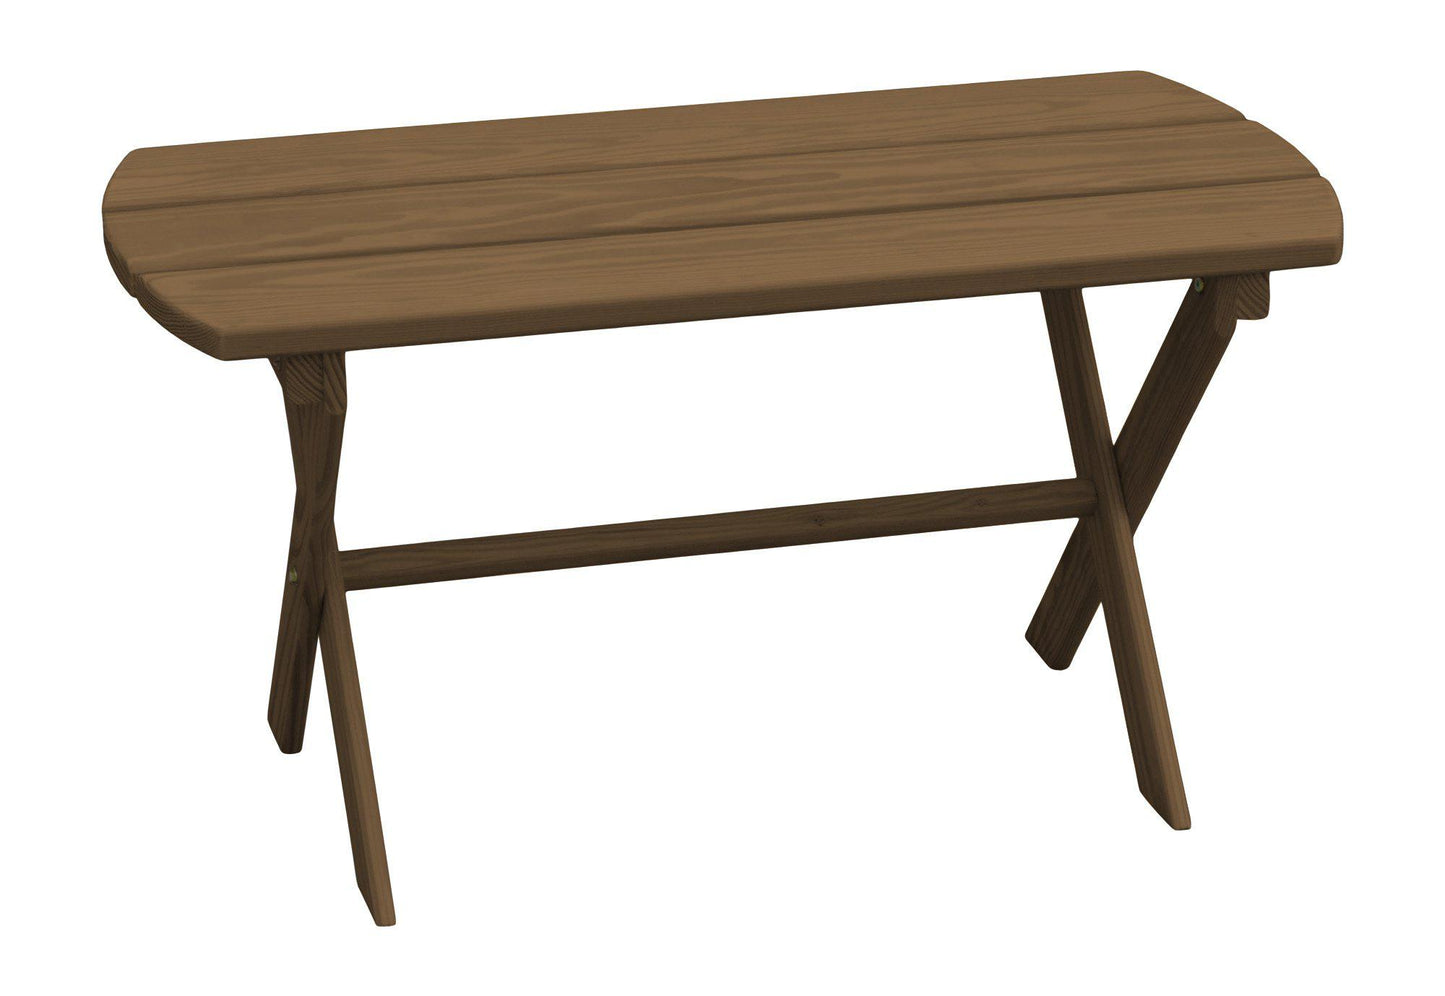 A&L Furniture Co. Yellow Pine Folding Coffee Table - LEAD TIME TO SHIP 10 BUSINESS DAYS